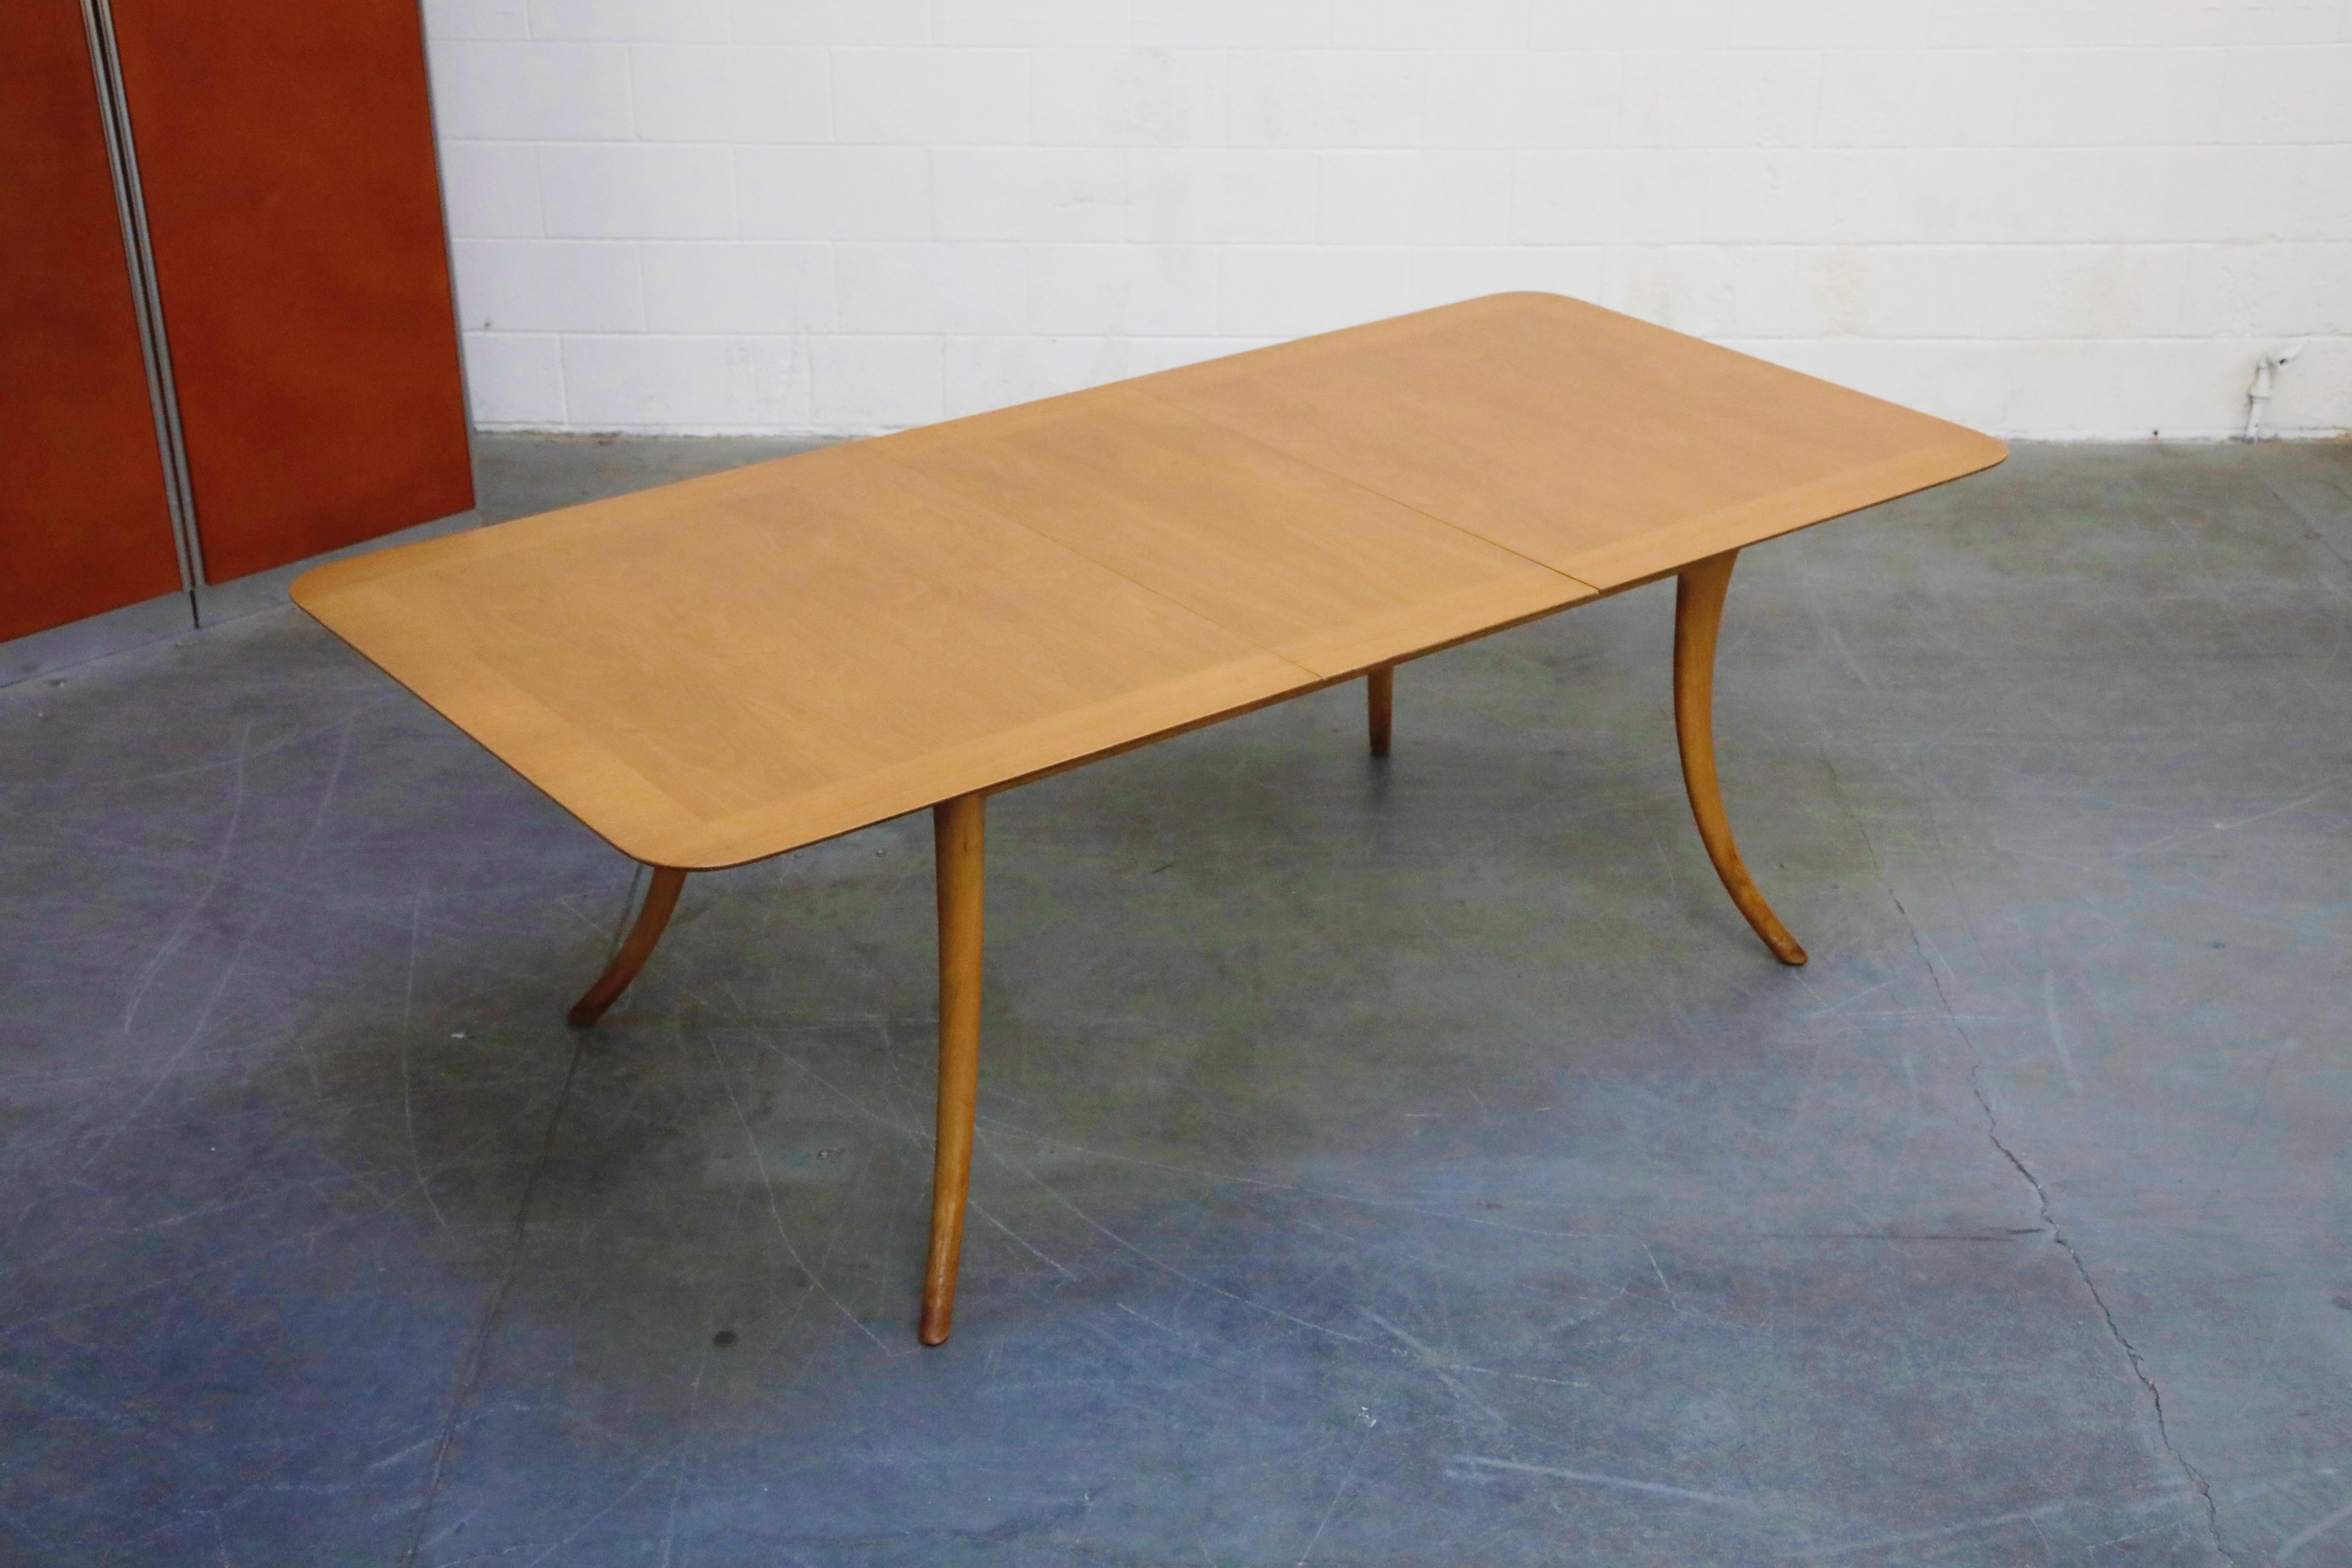 Mahogany Expandable Dining Table by T.H. Robsjohn-Gibbings for Widdicomb, 1957, Signed